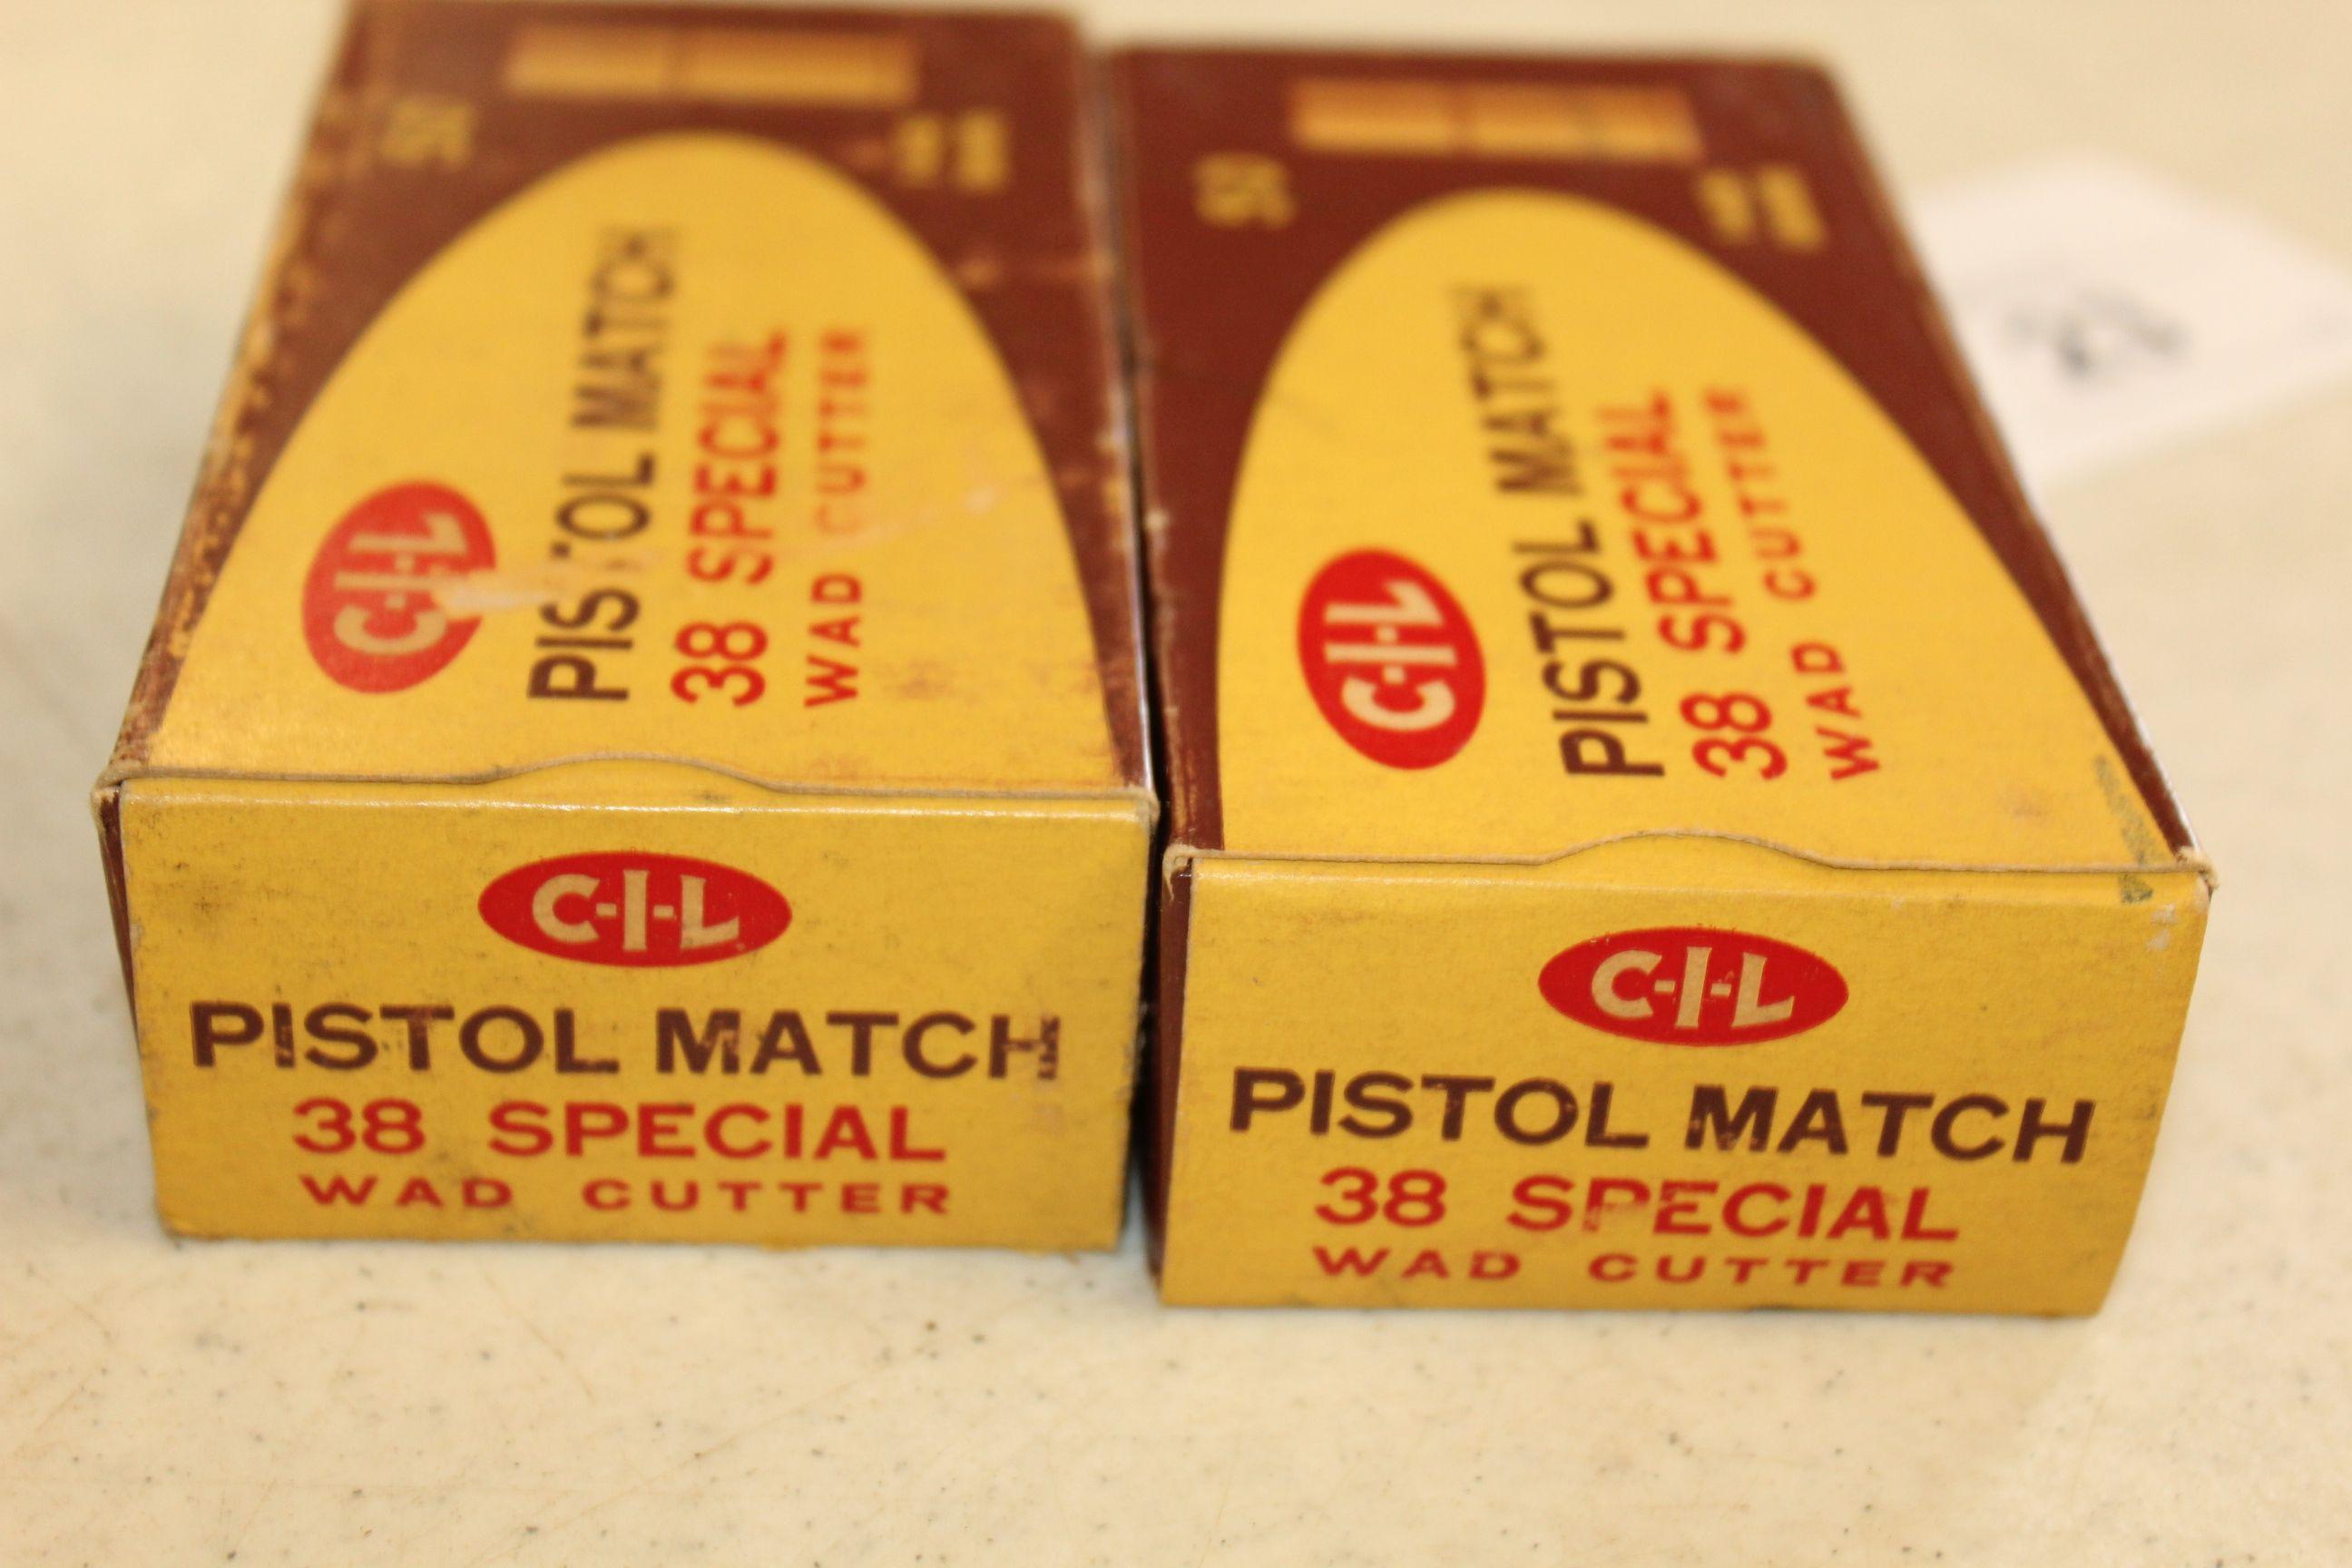 100 Rounds of CIL .38 Special Wad Cutter Pistol Match Ammo